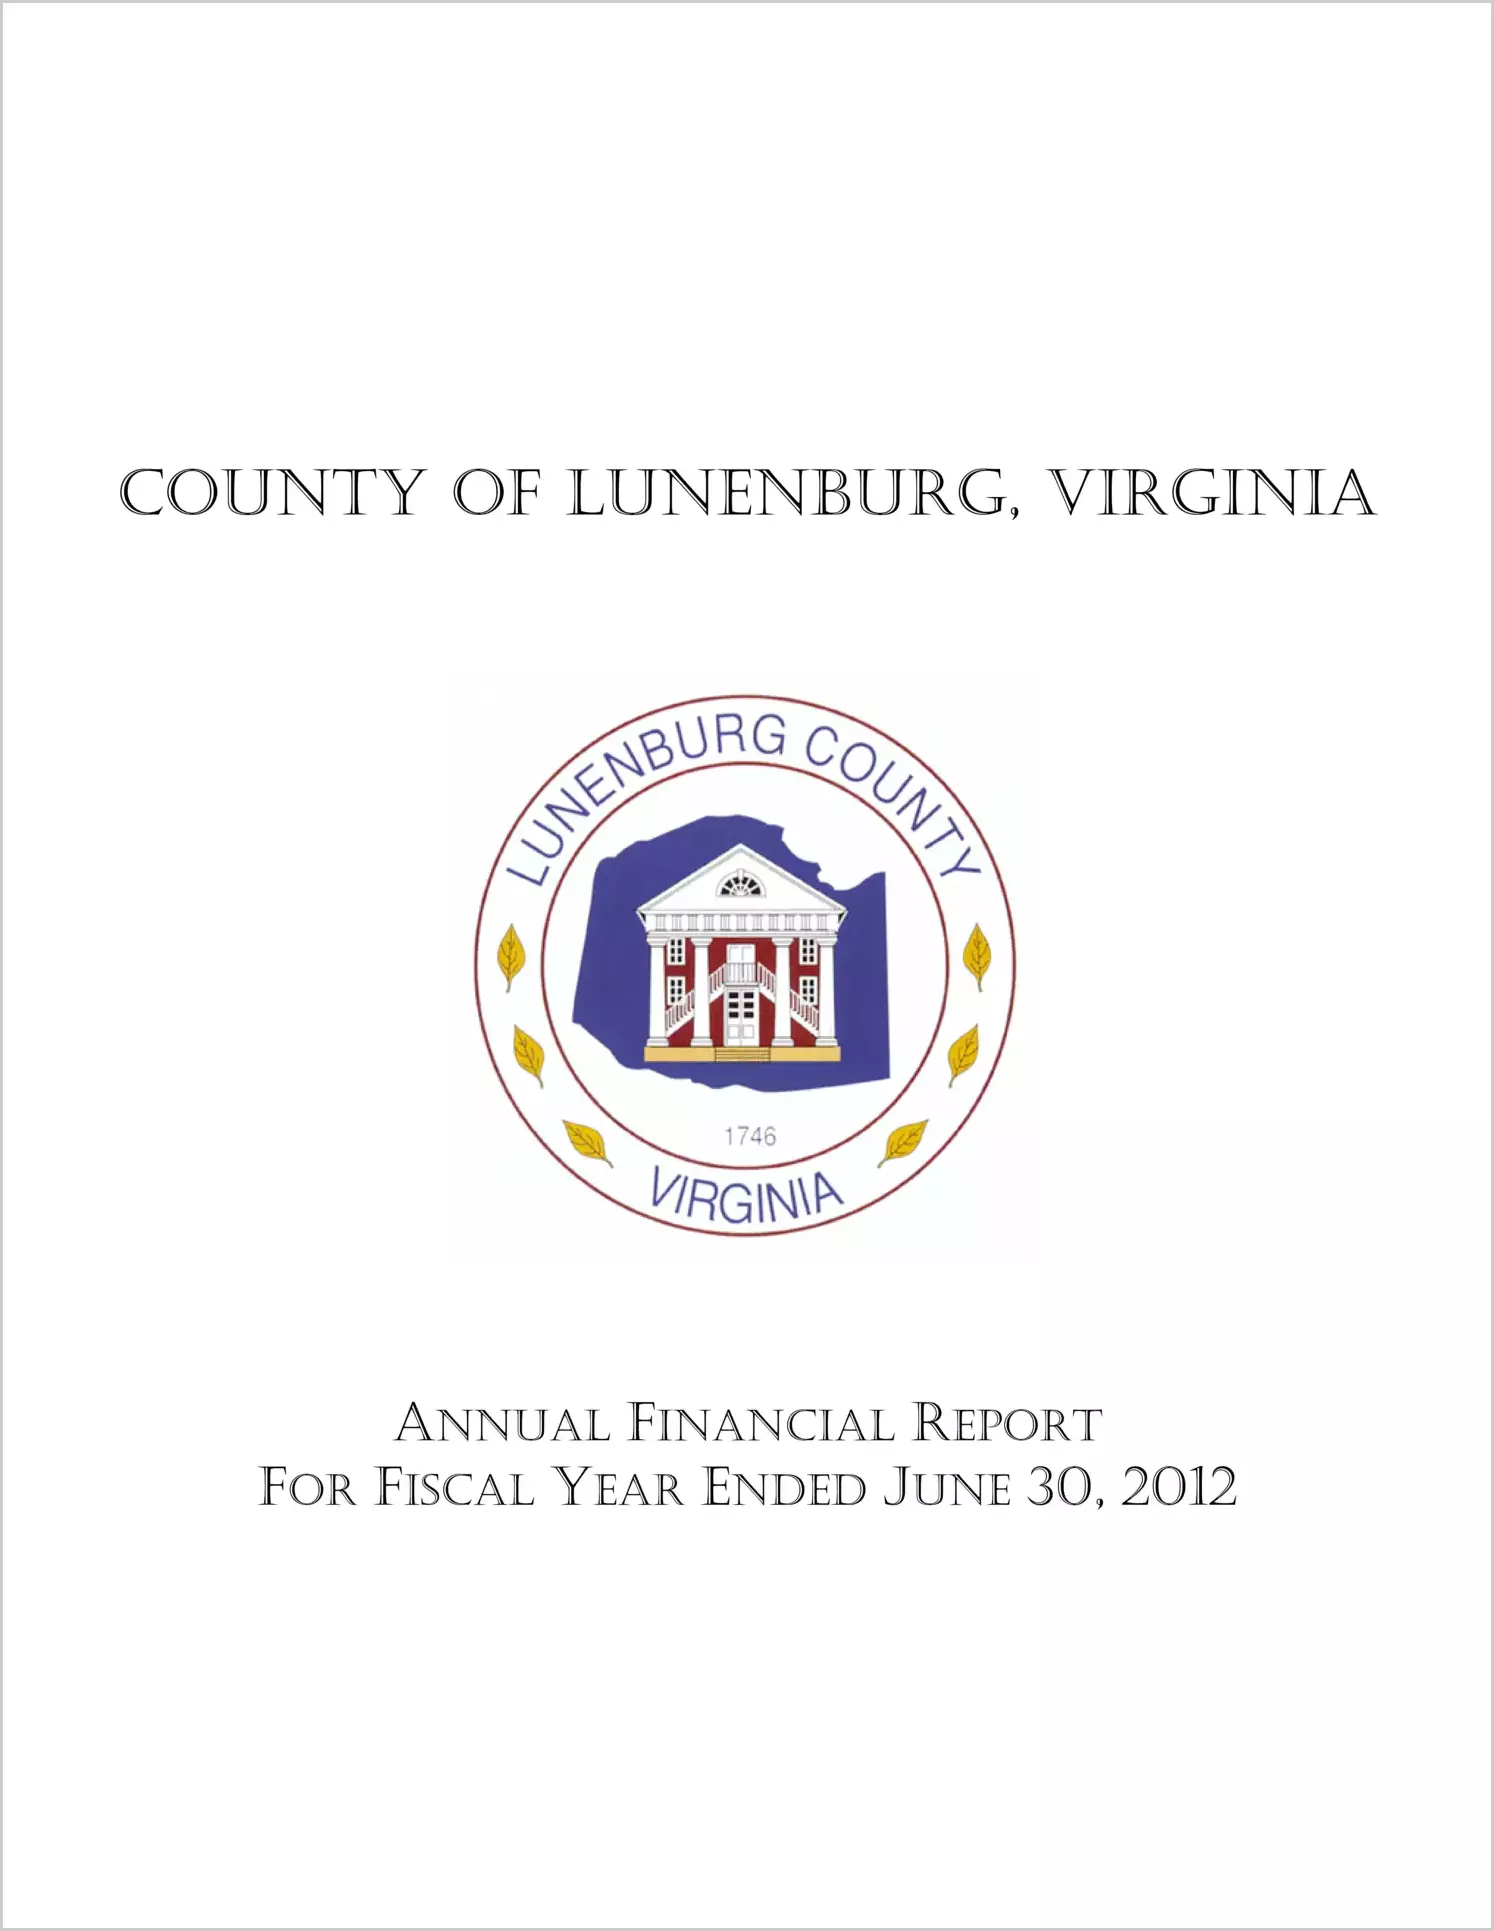 2012 Annual Financial Report for County of Lunenburg